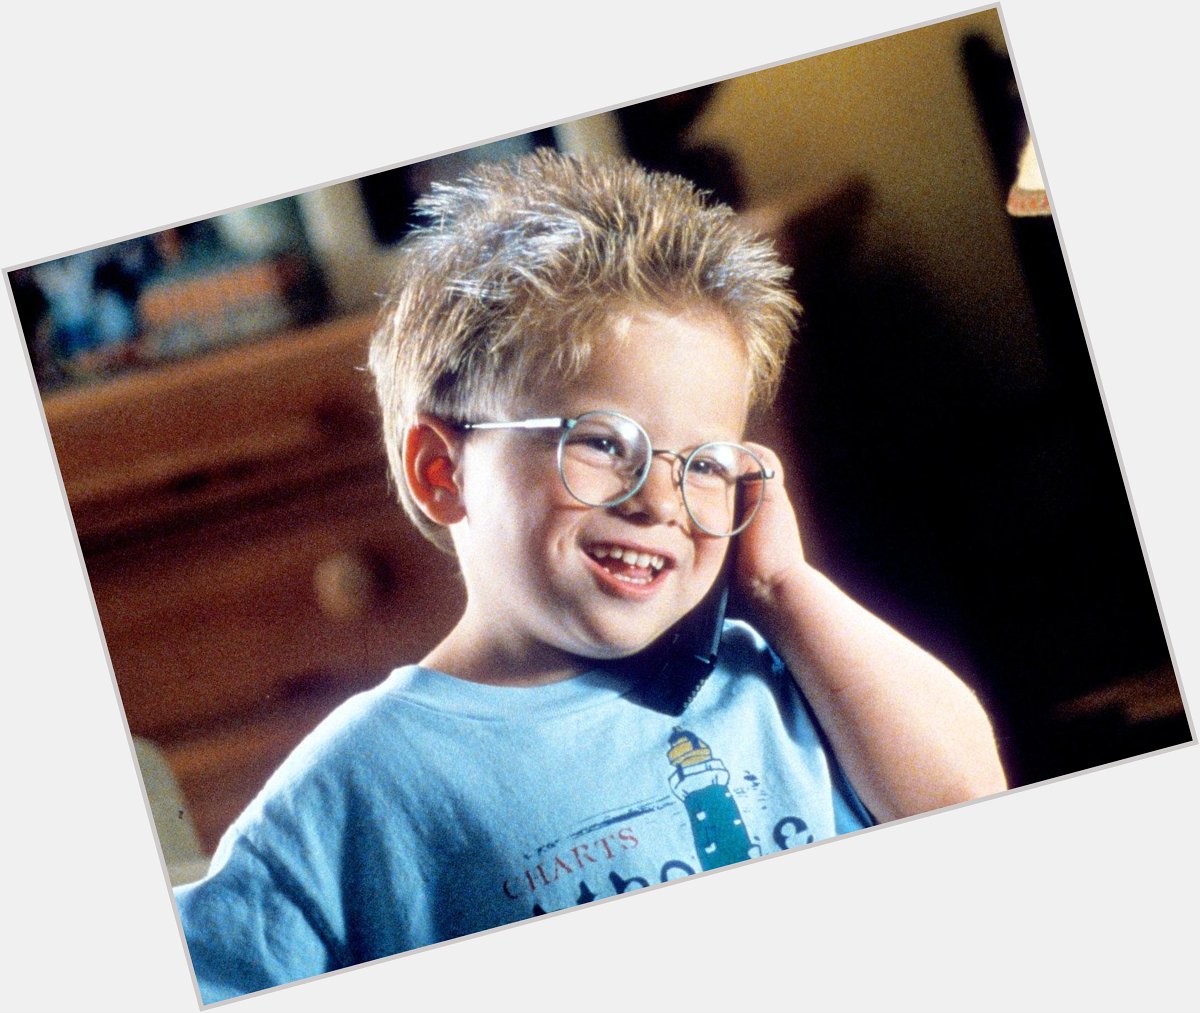 Happy 25th Birthday Send your message to the adorable Jerry Maguire Kid!  